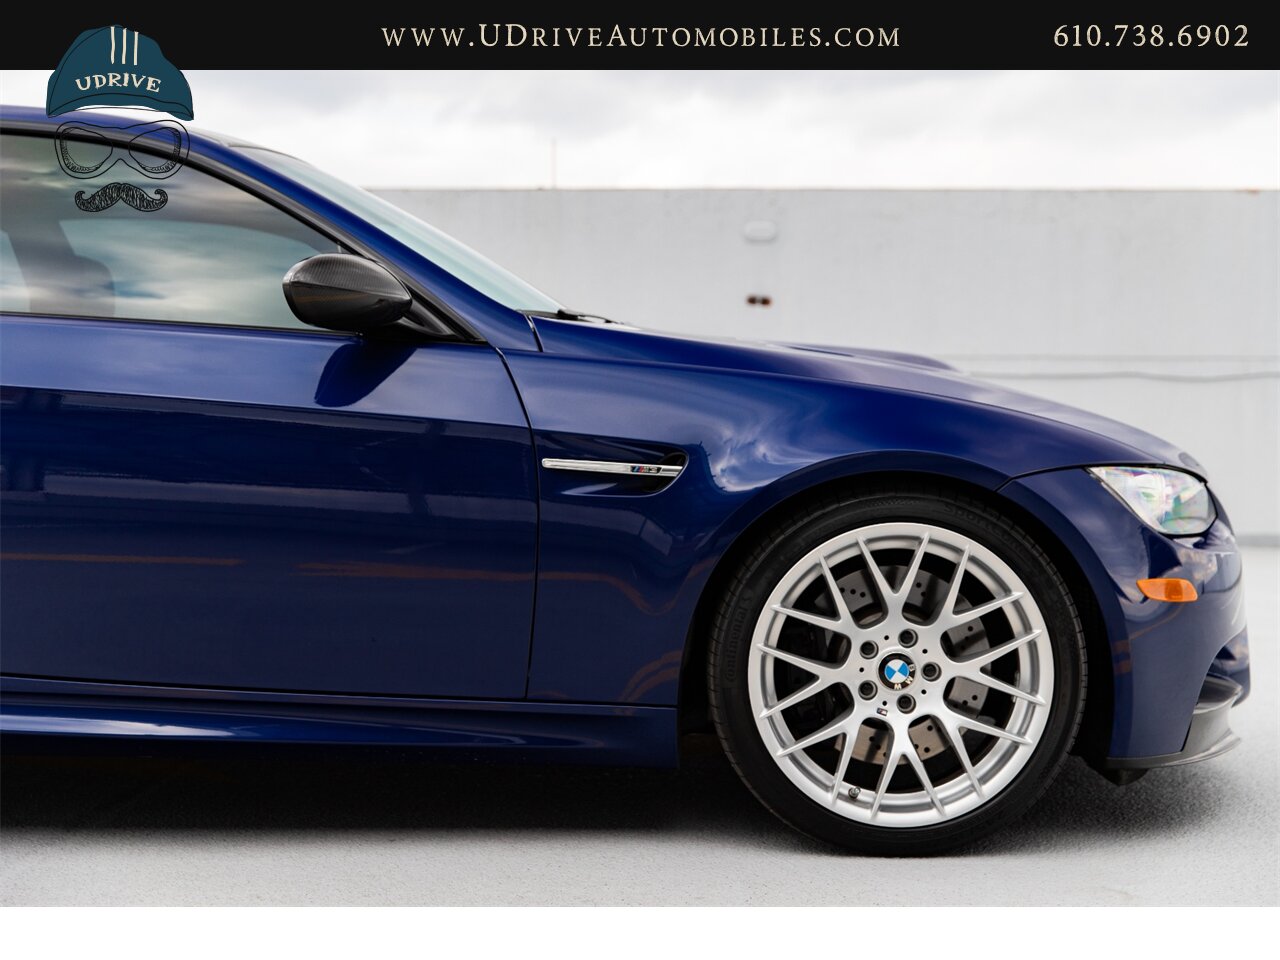 2011 BMW M3 E92 6 Speed Manual Competition Pkg Interlagos Blue  16k Miles Nav PDC EDC Comf Acc - Photo 16 - West Chester, PA 19382